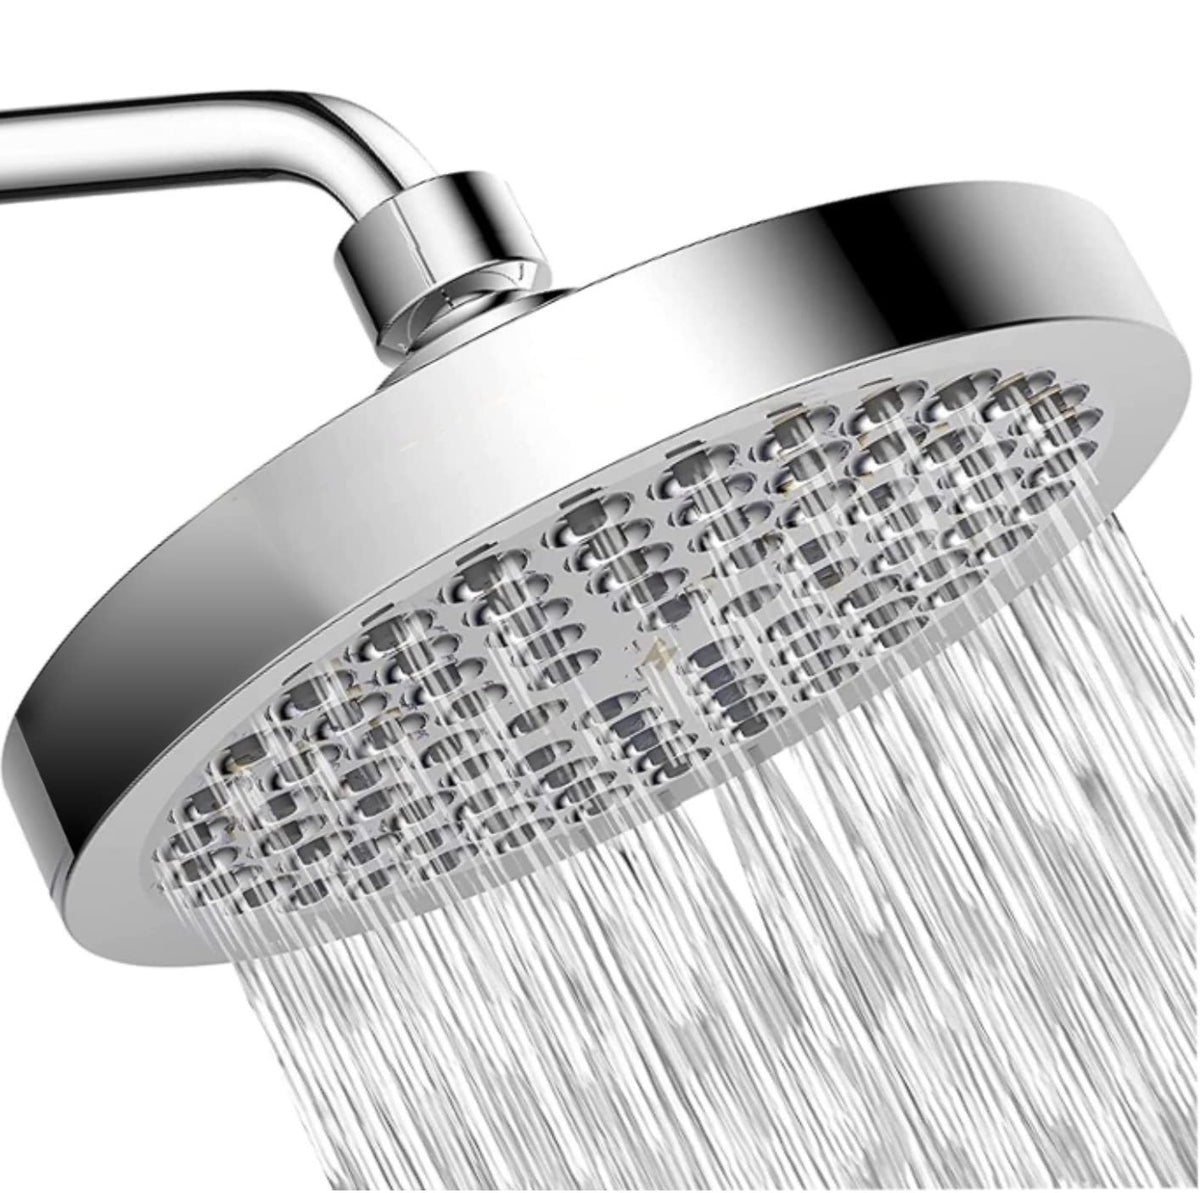 High Density Rain Shower Head 6 Inches , Chrome, Polished Finish - Marcoware